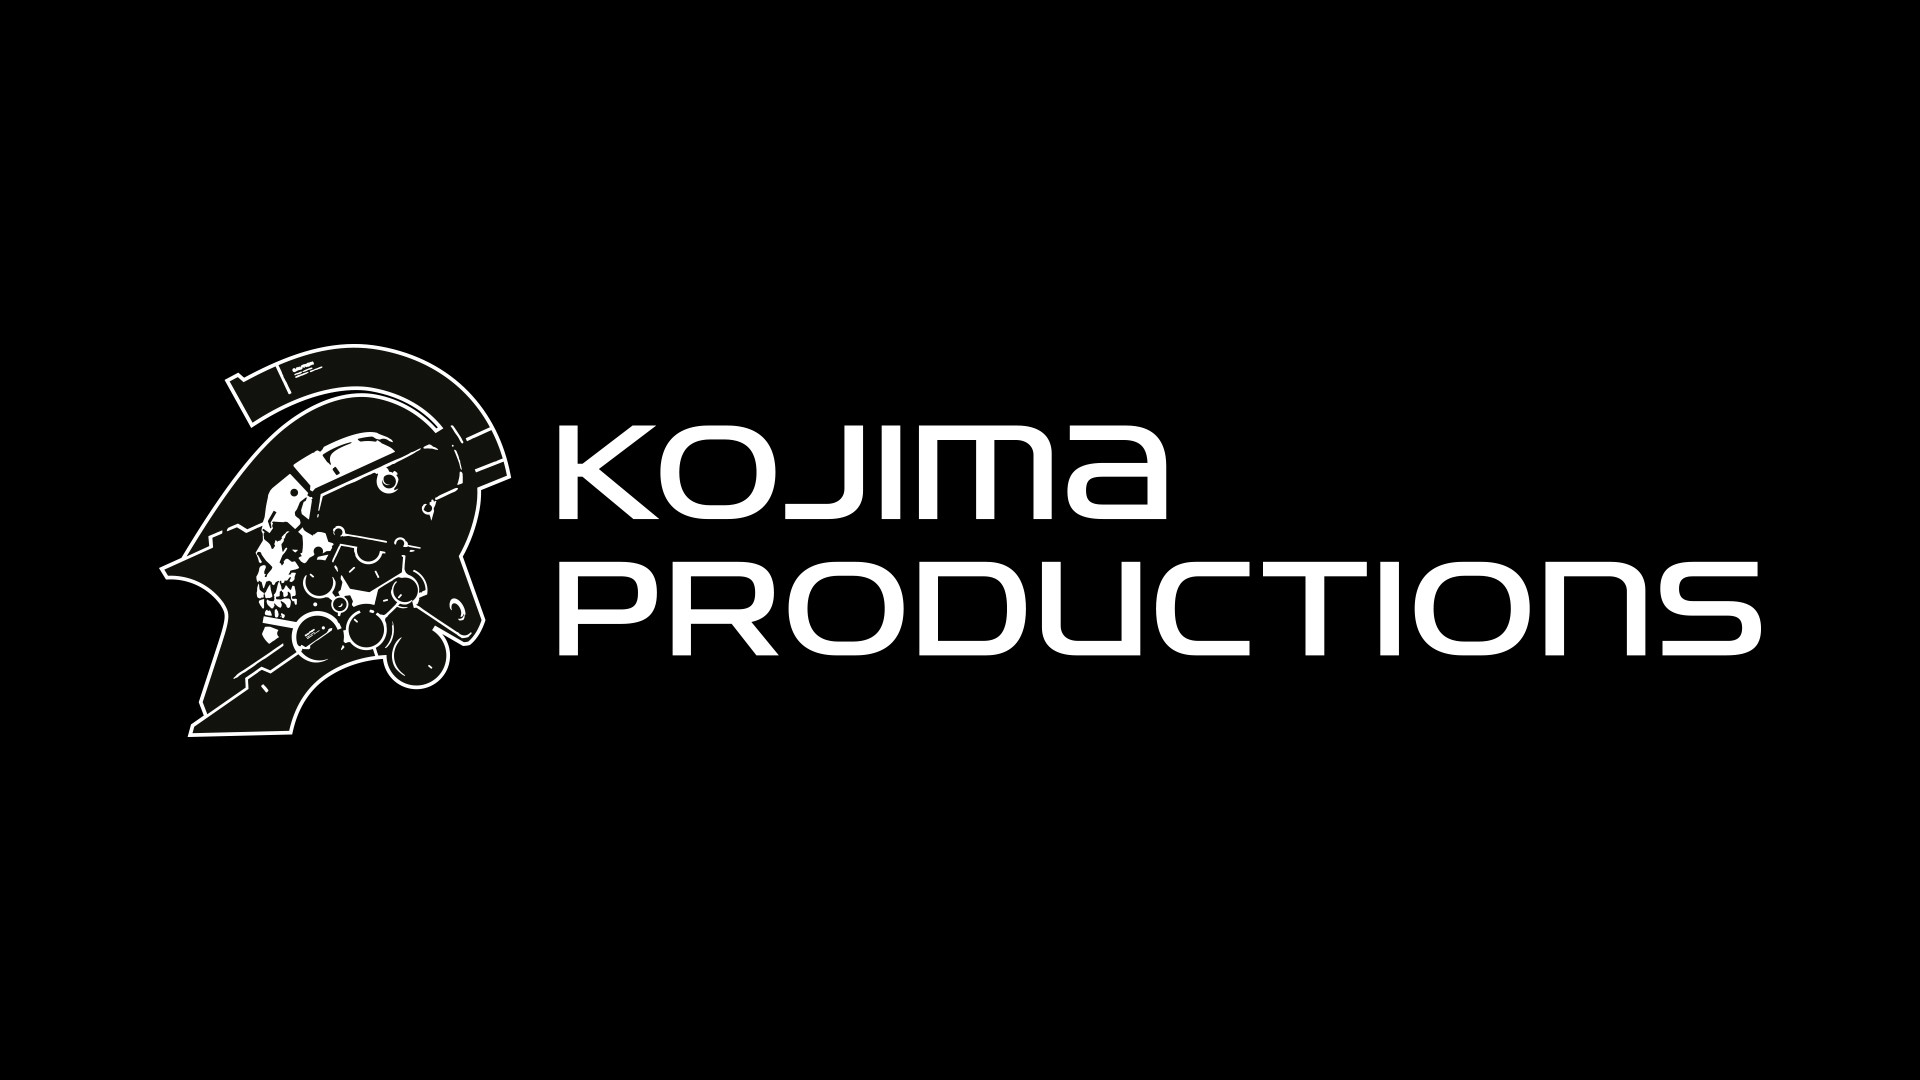 Could a reveal for Kojima's recently teased project be coming